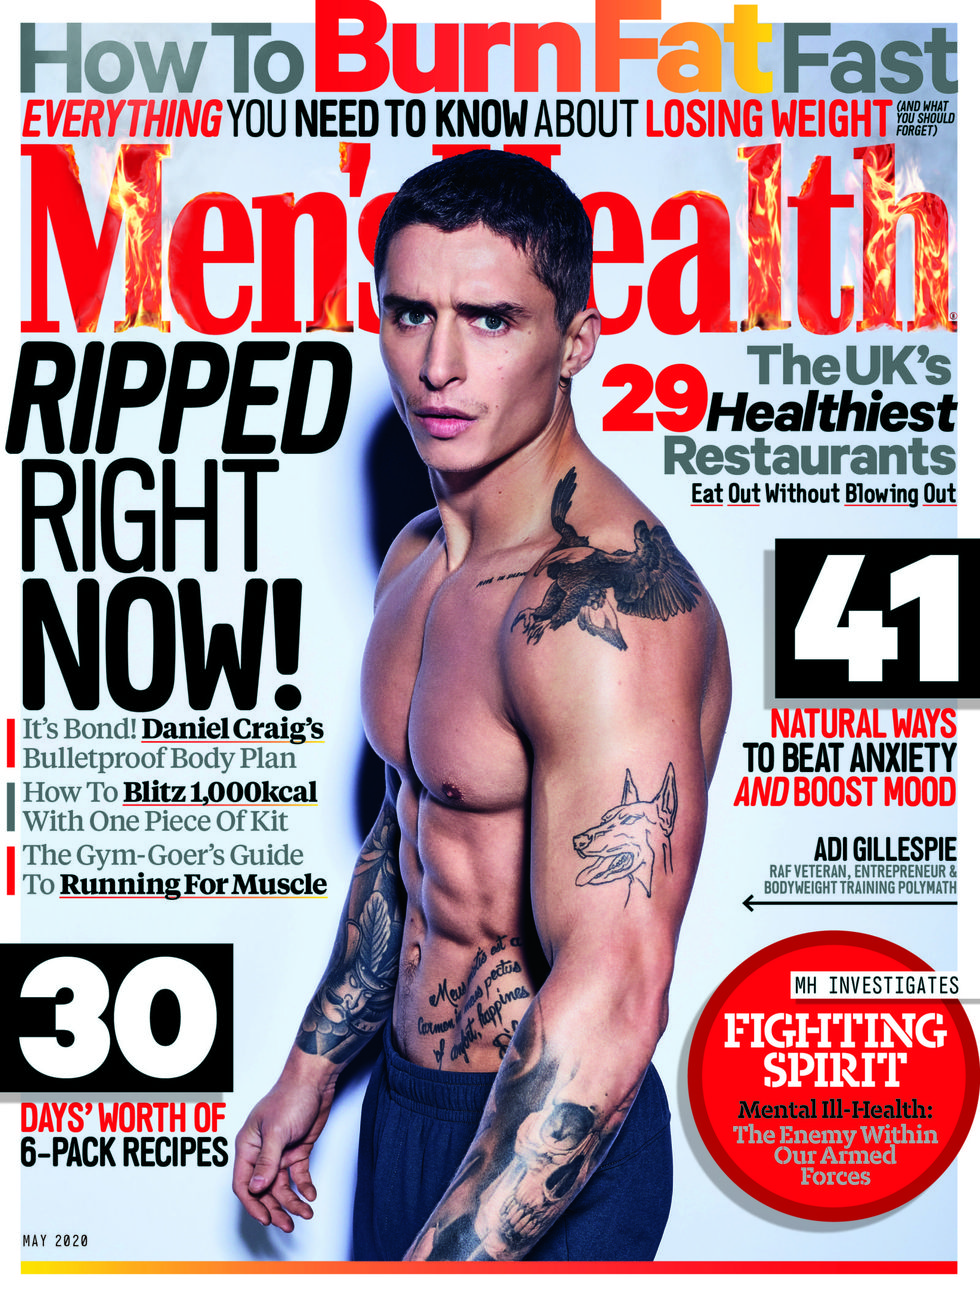 Subscribe to Men’s Health for £6